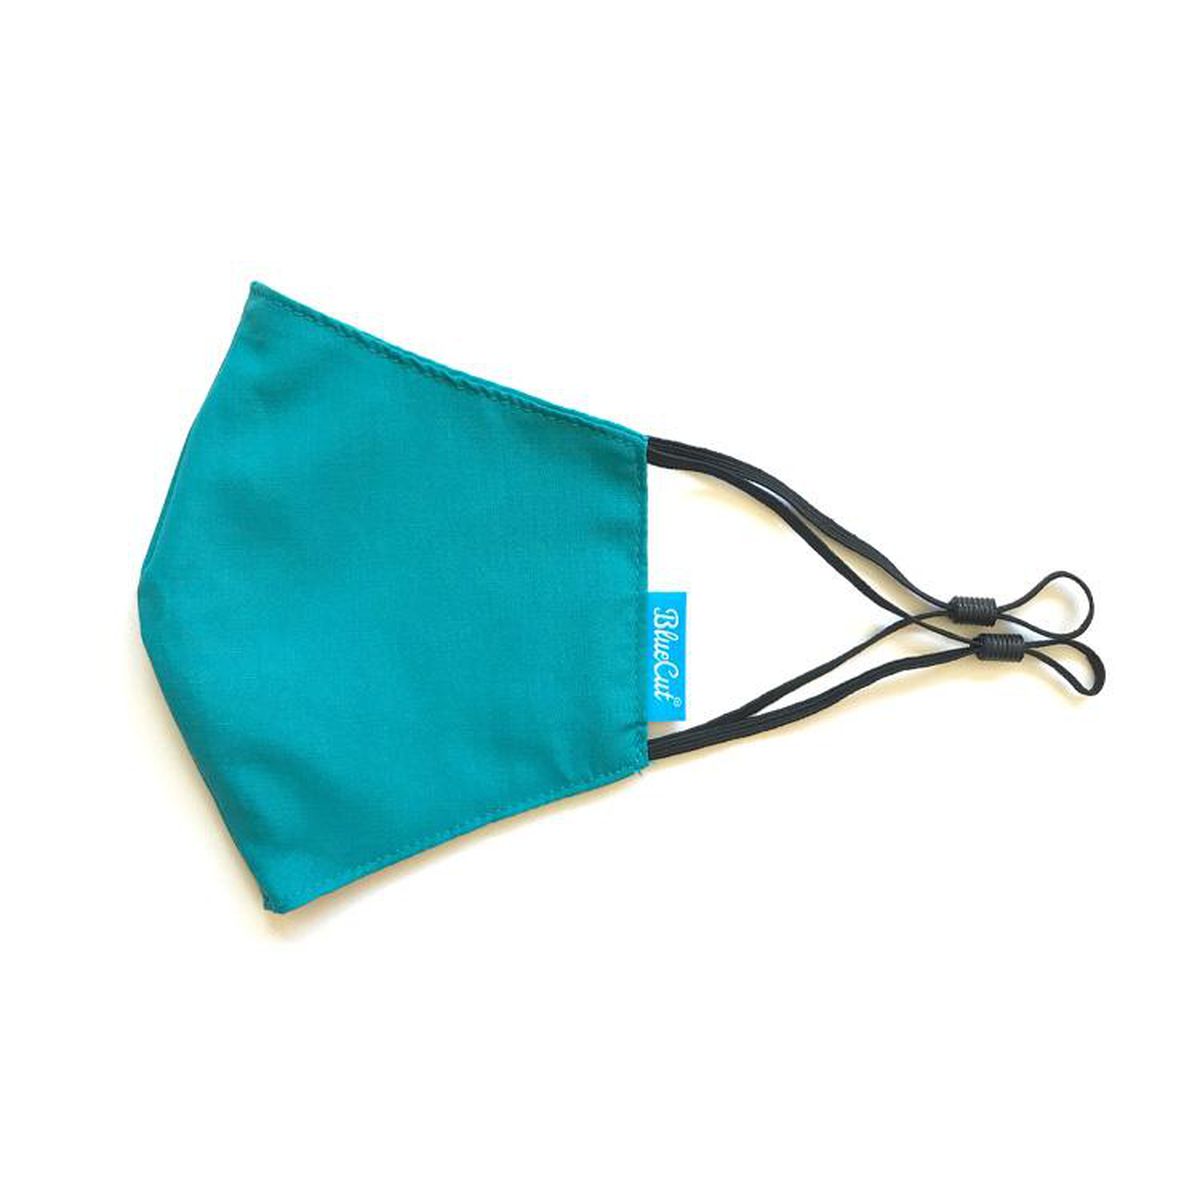 A teal face mask